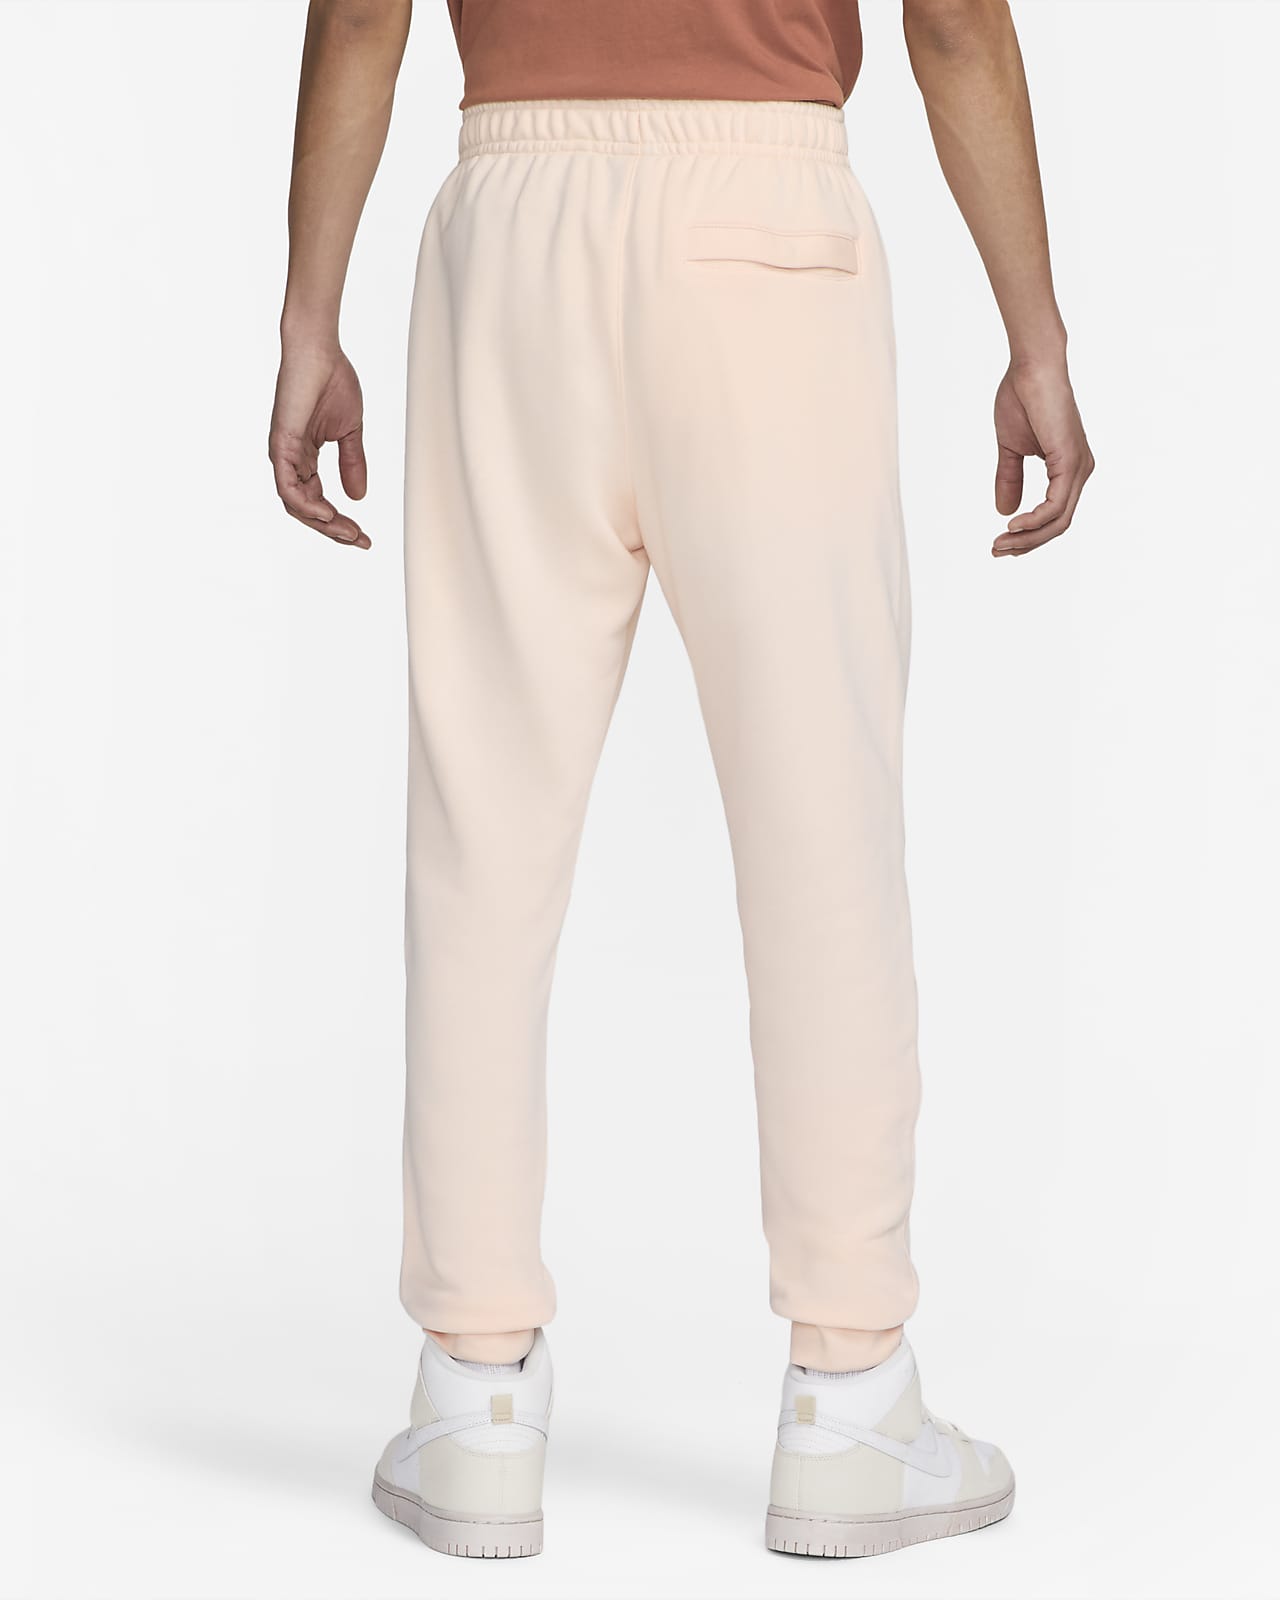 https://static.nike.com/a/images/t_PDP_1280_v1/f_auto,q_auto:eco/fd94423e-7b03-4e97-bb64-d20f75a1d06e/pantalon-de-jogging-sportswear-club-pour-cdWXmf.png